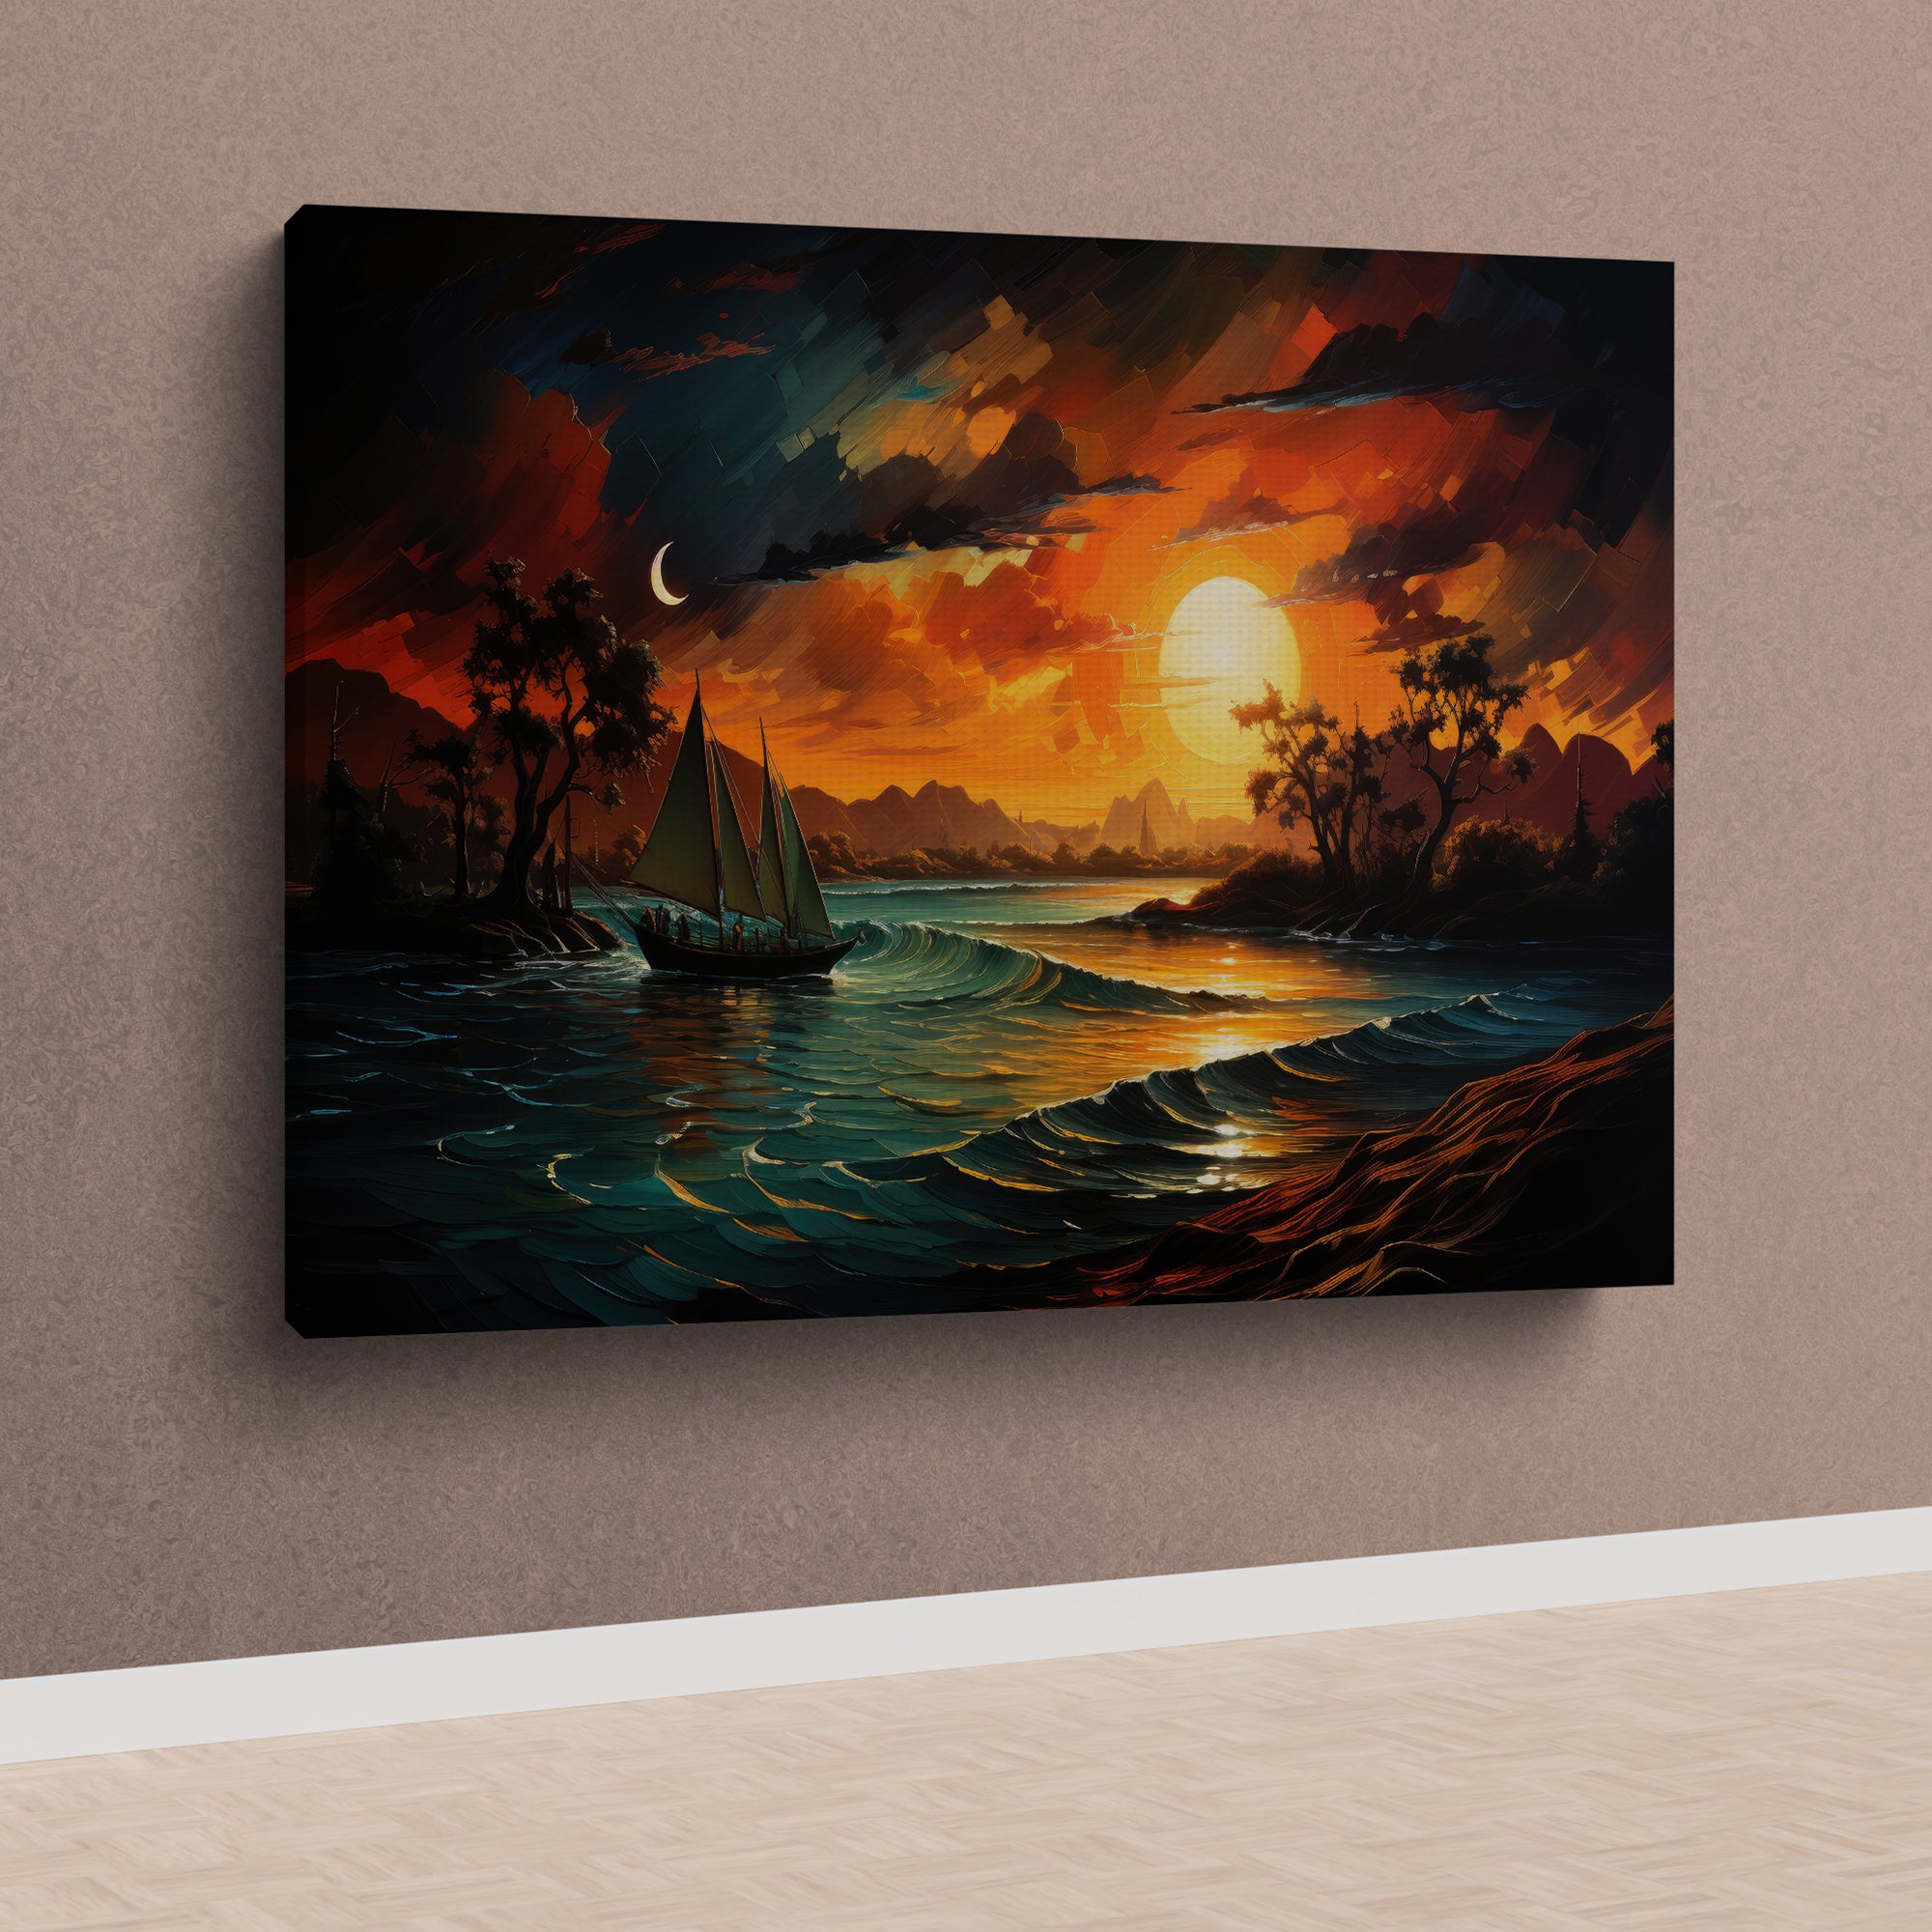 Sunset With A Boat In The Water Canvas Wall Painting